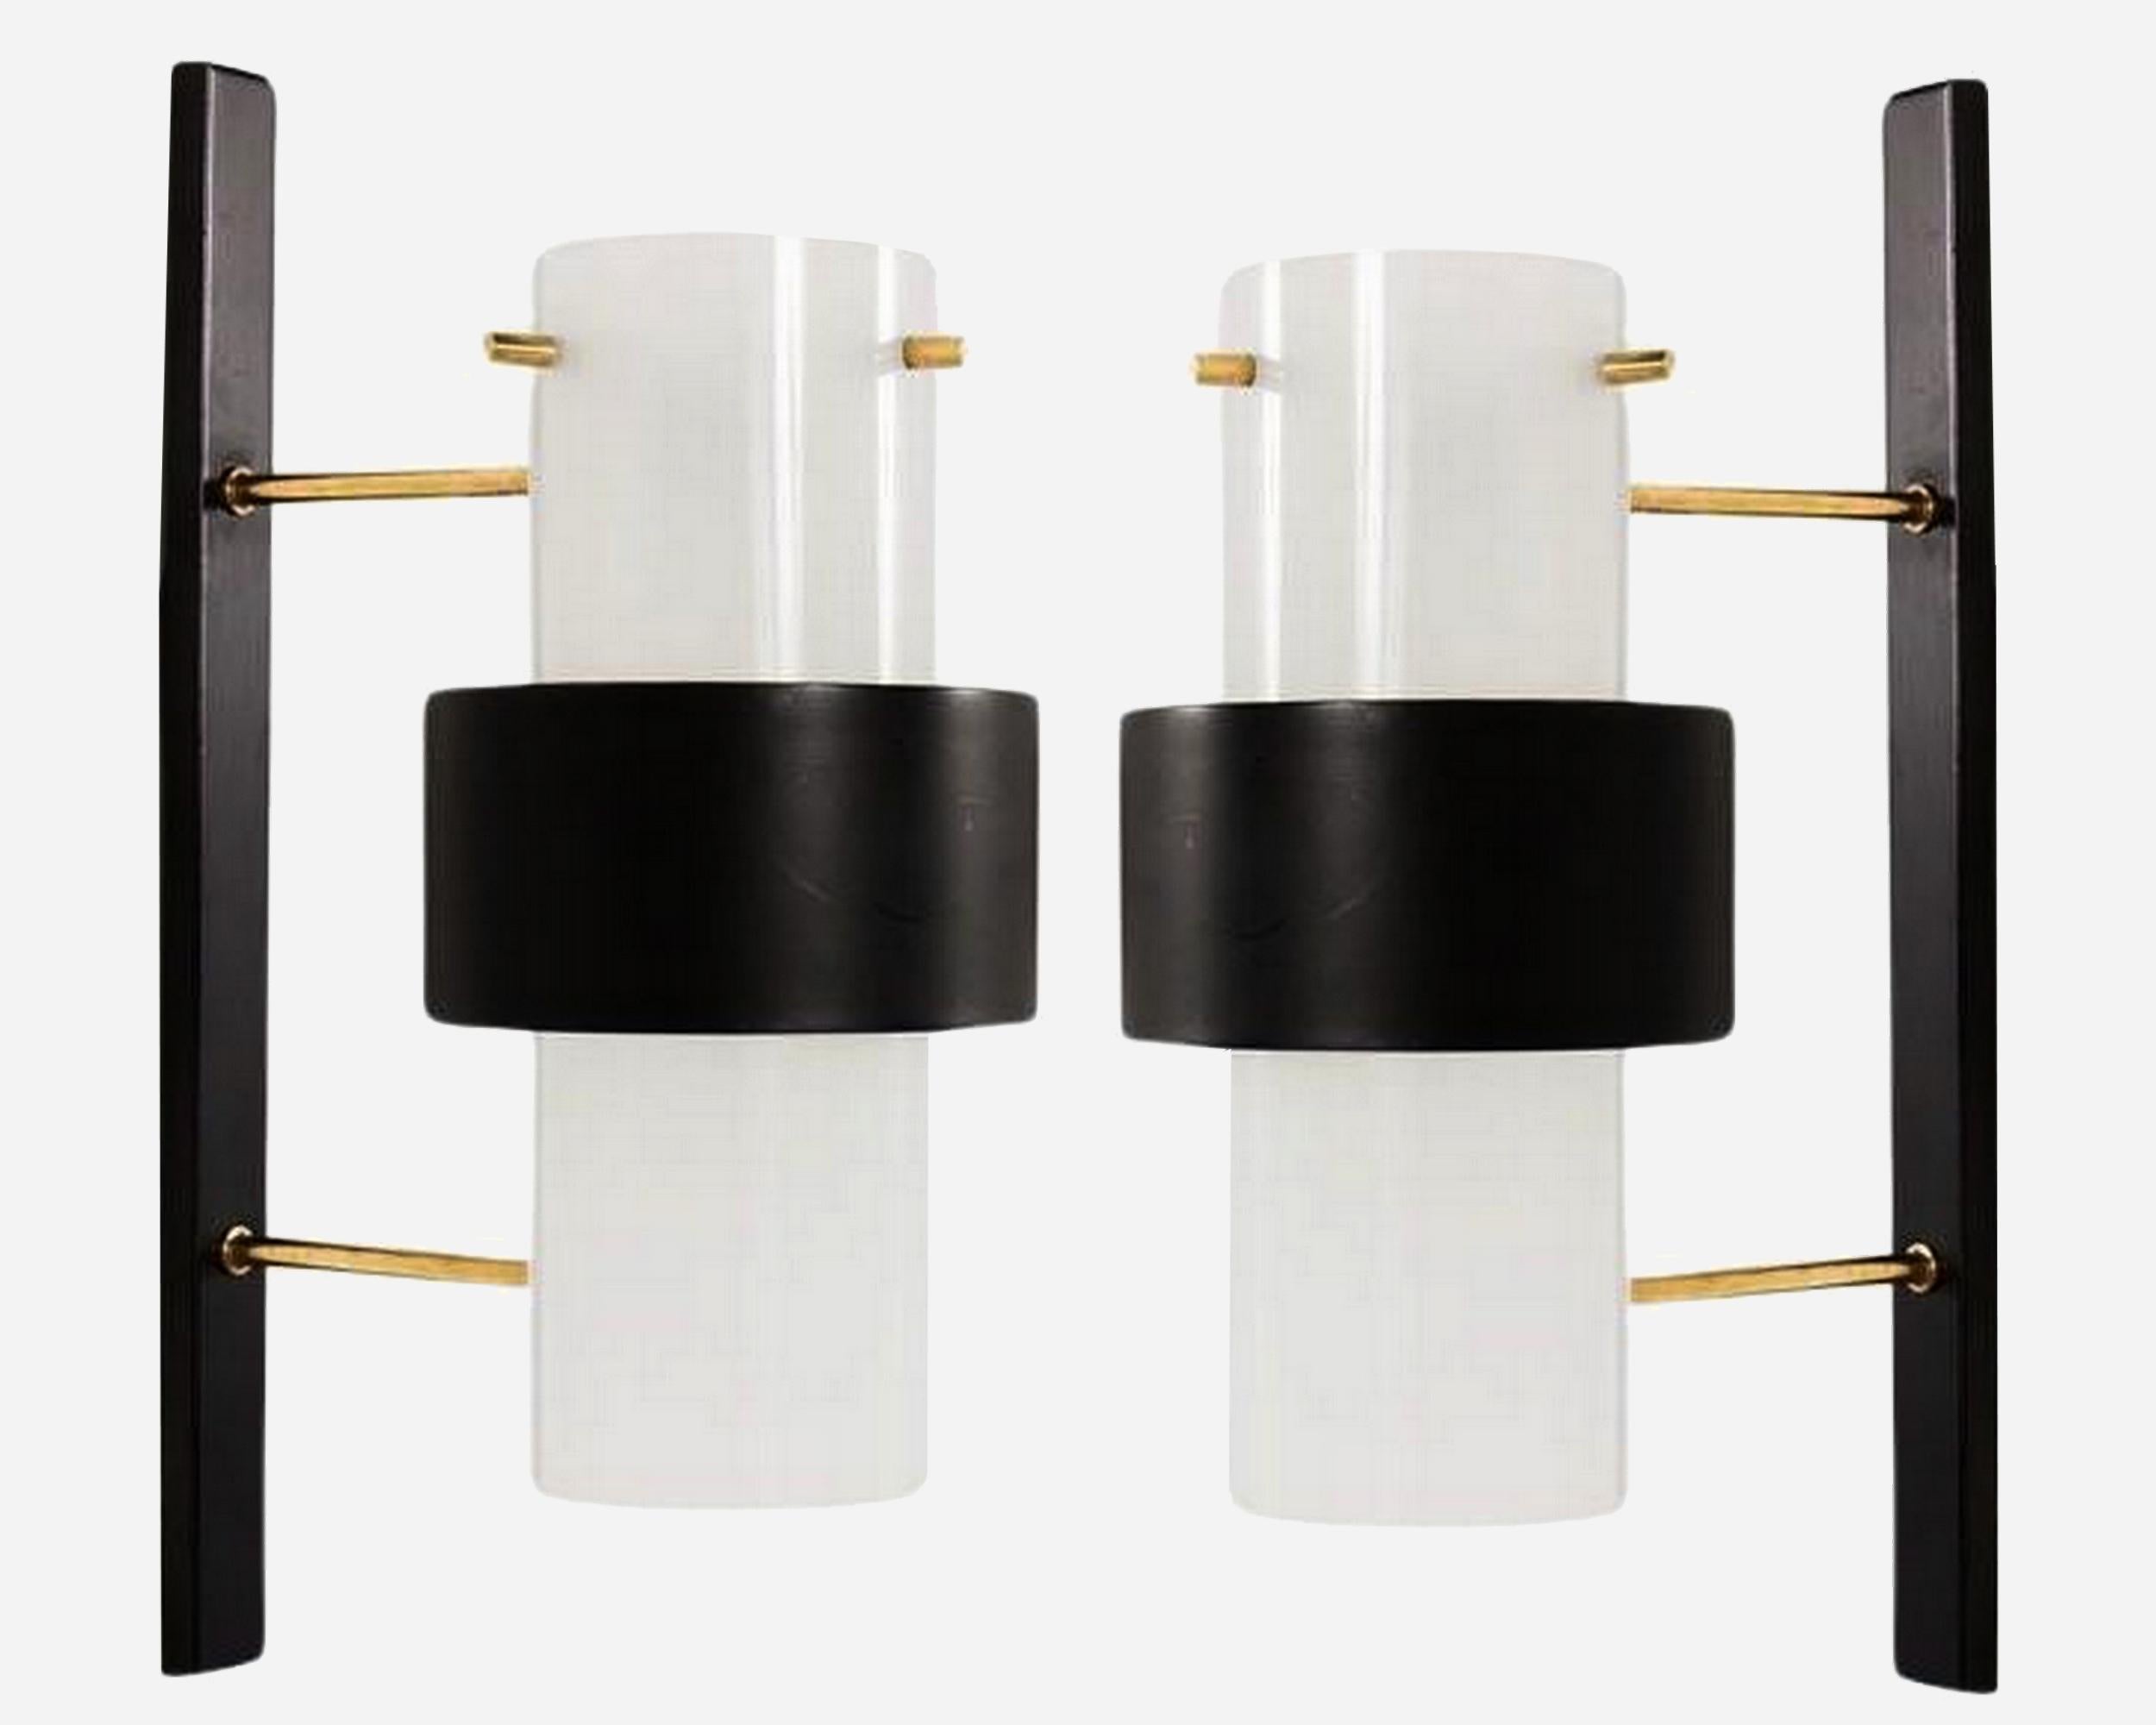 Pair of sconces in perspex, brass and black lacquered metal, designed by Royal Lumière and published by Maison Lunel.